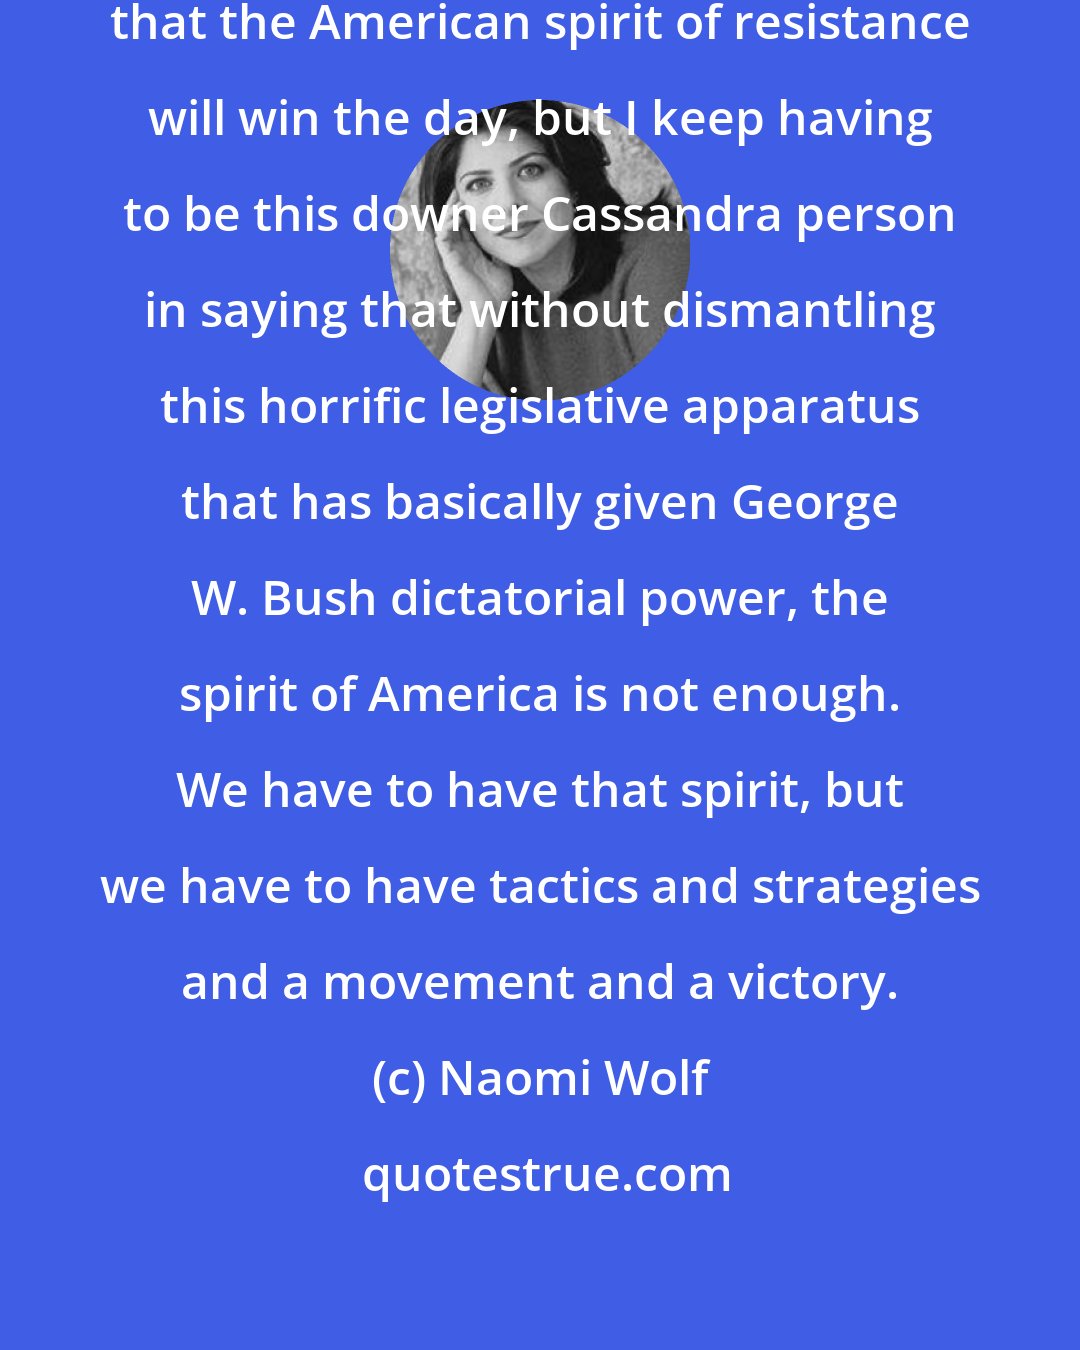 Naomi Wolf: I would like to trust and believe that the American spirit of resistance will win the day, but I keep having to be this downer Cassandra person in saying that without dismantling this horrific legislative apparatus that has basically given George W. Bush dictatorial power, the spirit of America is not enough. We have to have that spirit, but we have to have tactics and strategies and a movement and a victory.